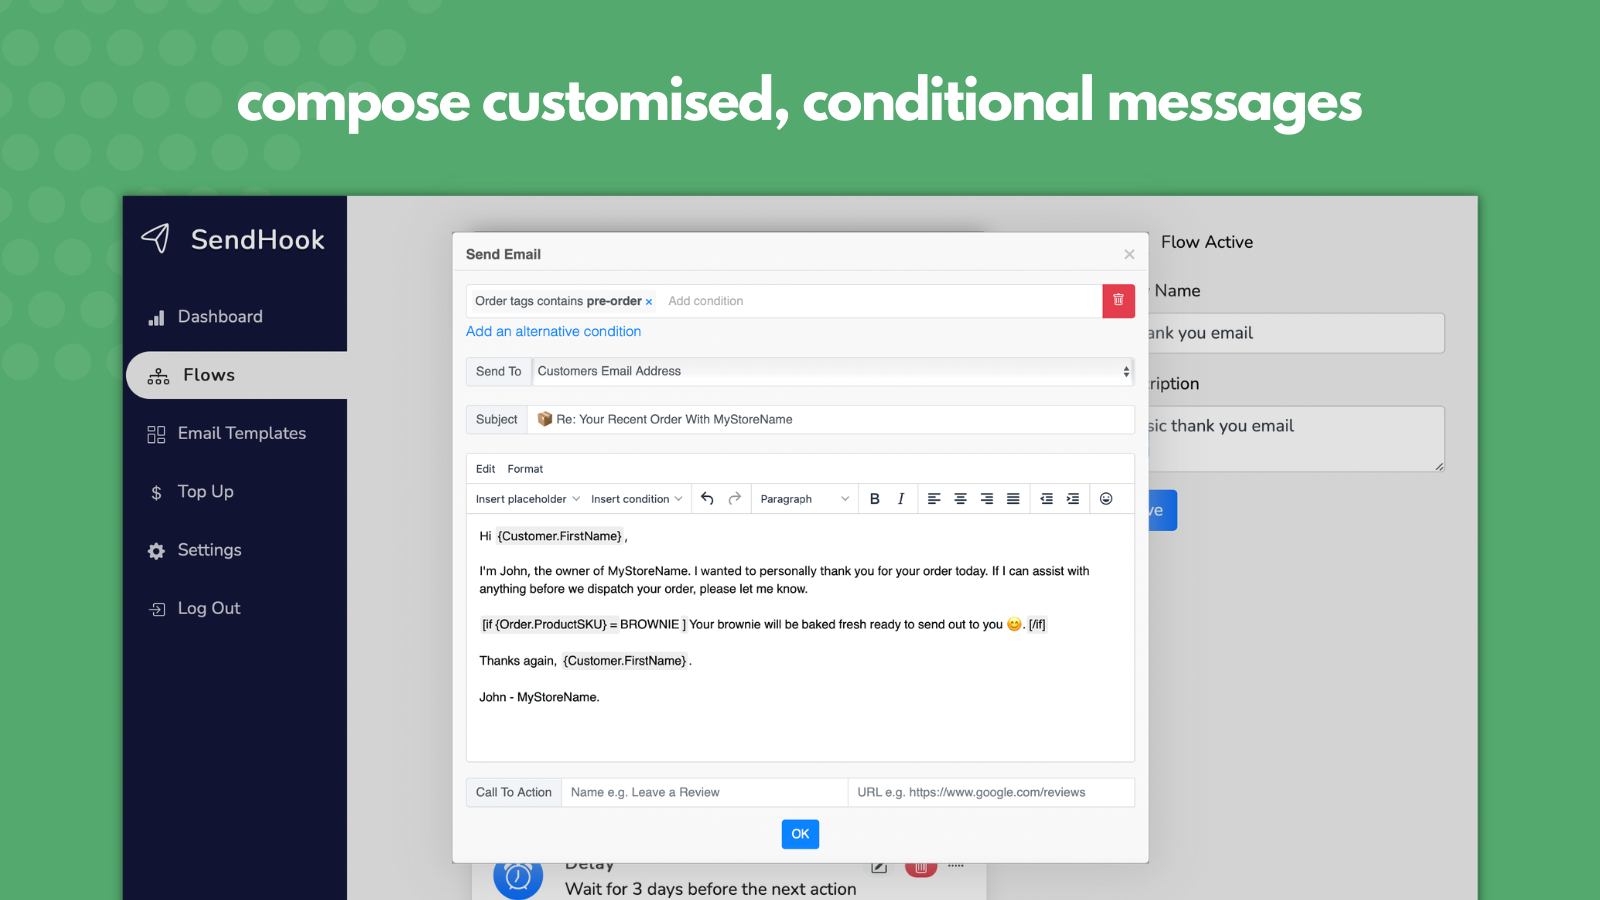 Use emojis, WYSIWYG editors and conditions for messages.